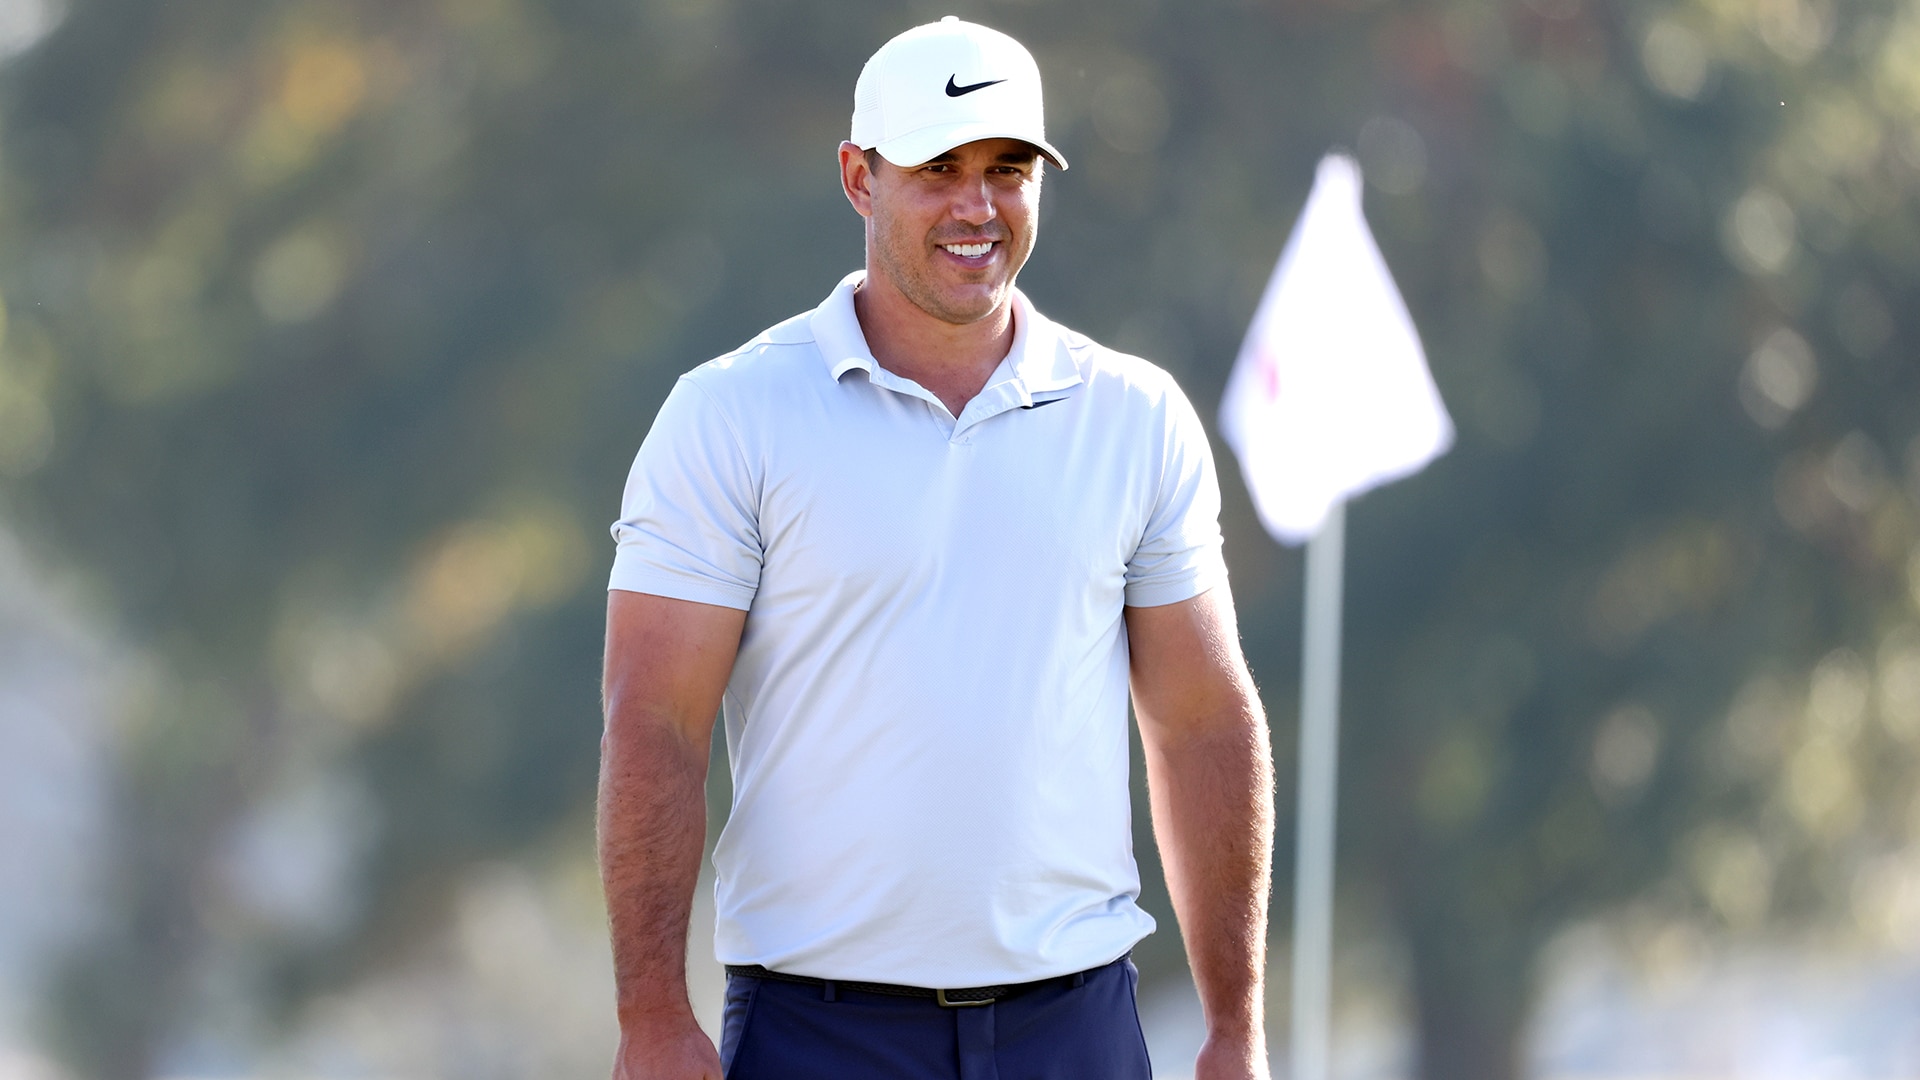 Most-read stories on GolfChannel.com in 2020: Brooks Koepka had plenty to say